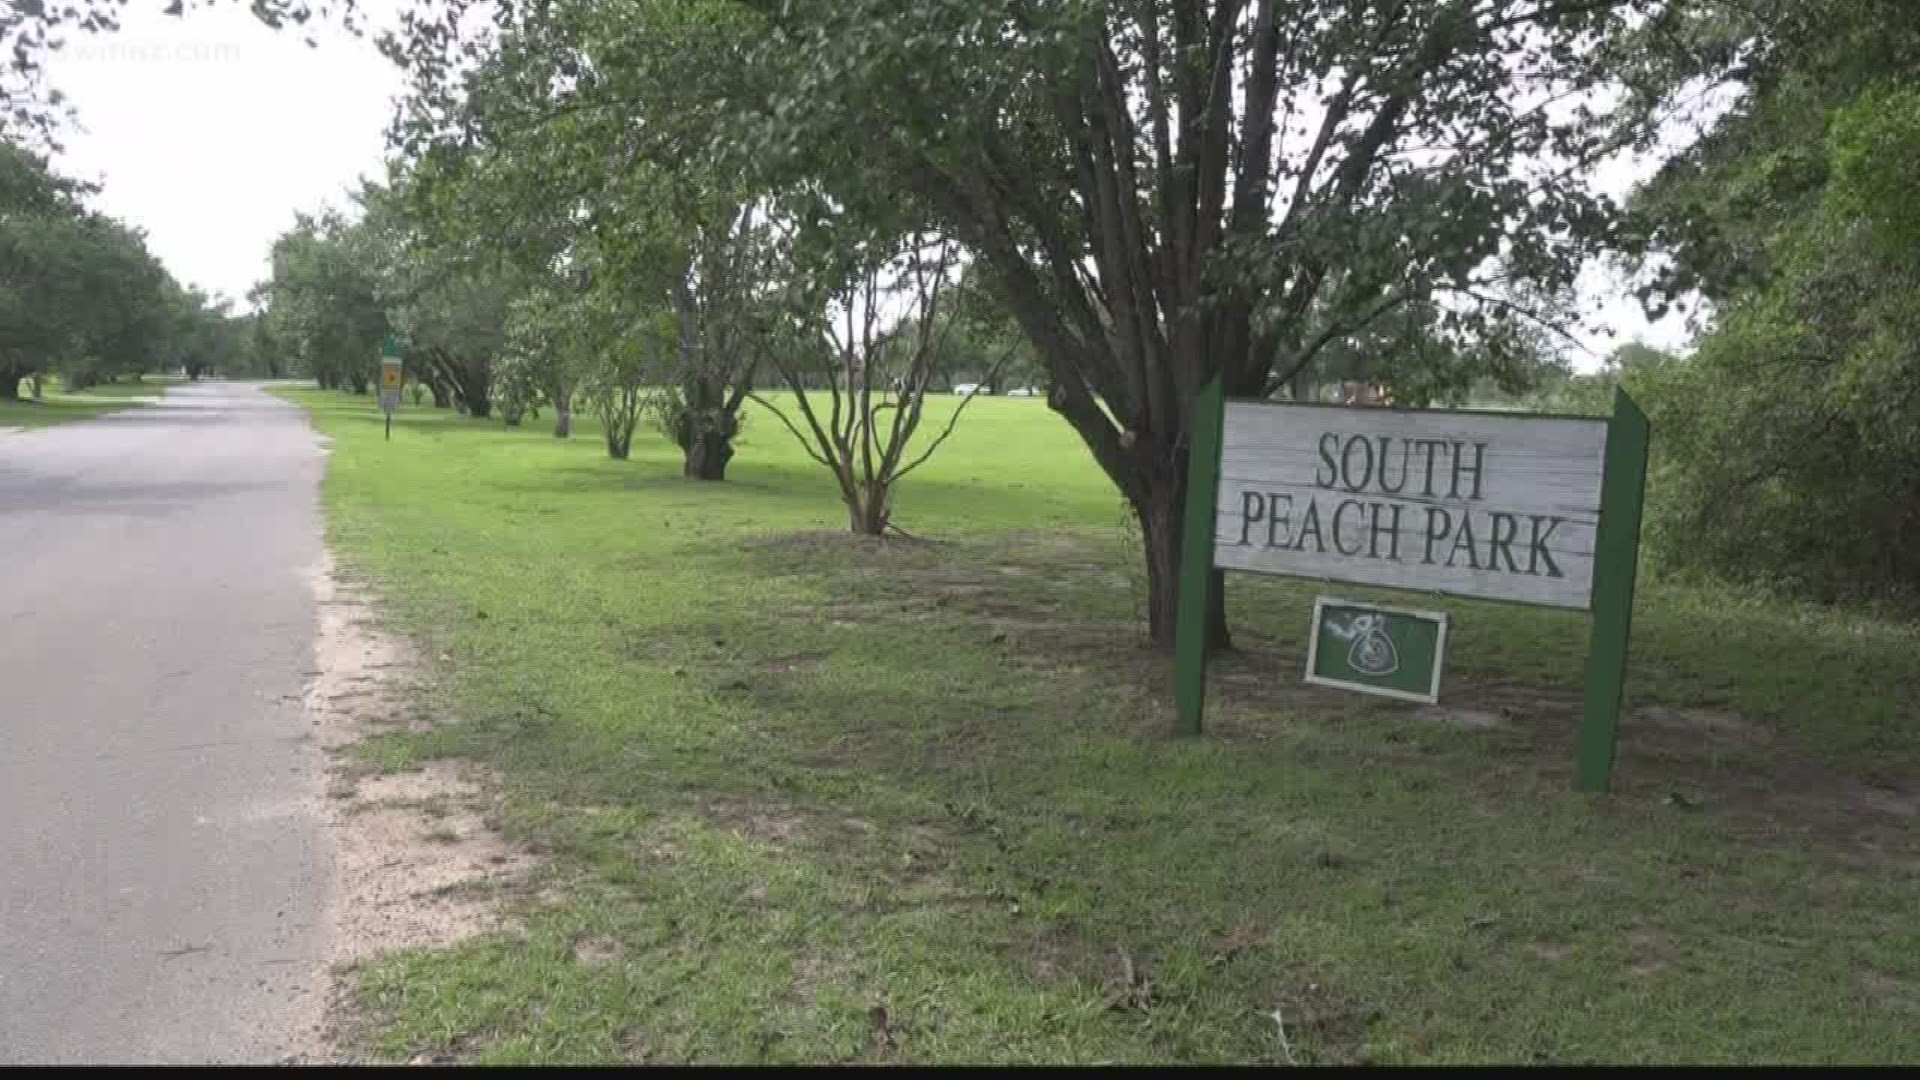 South Peach Park in Fort Valley could have a new entrance soon, thanks to the Peach County commission.